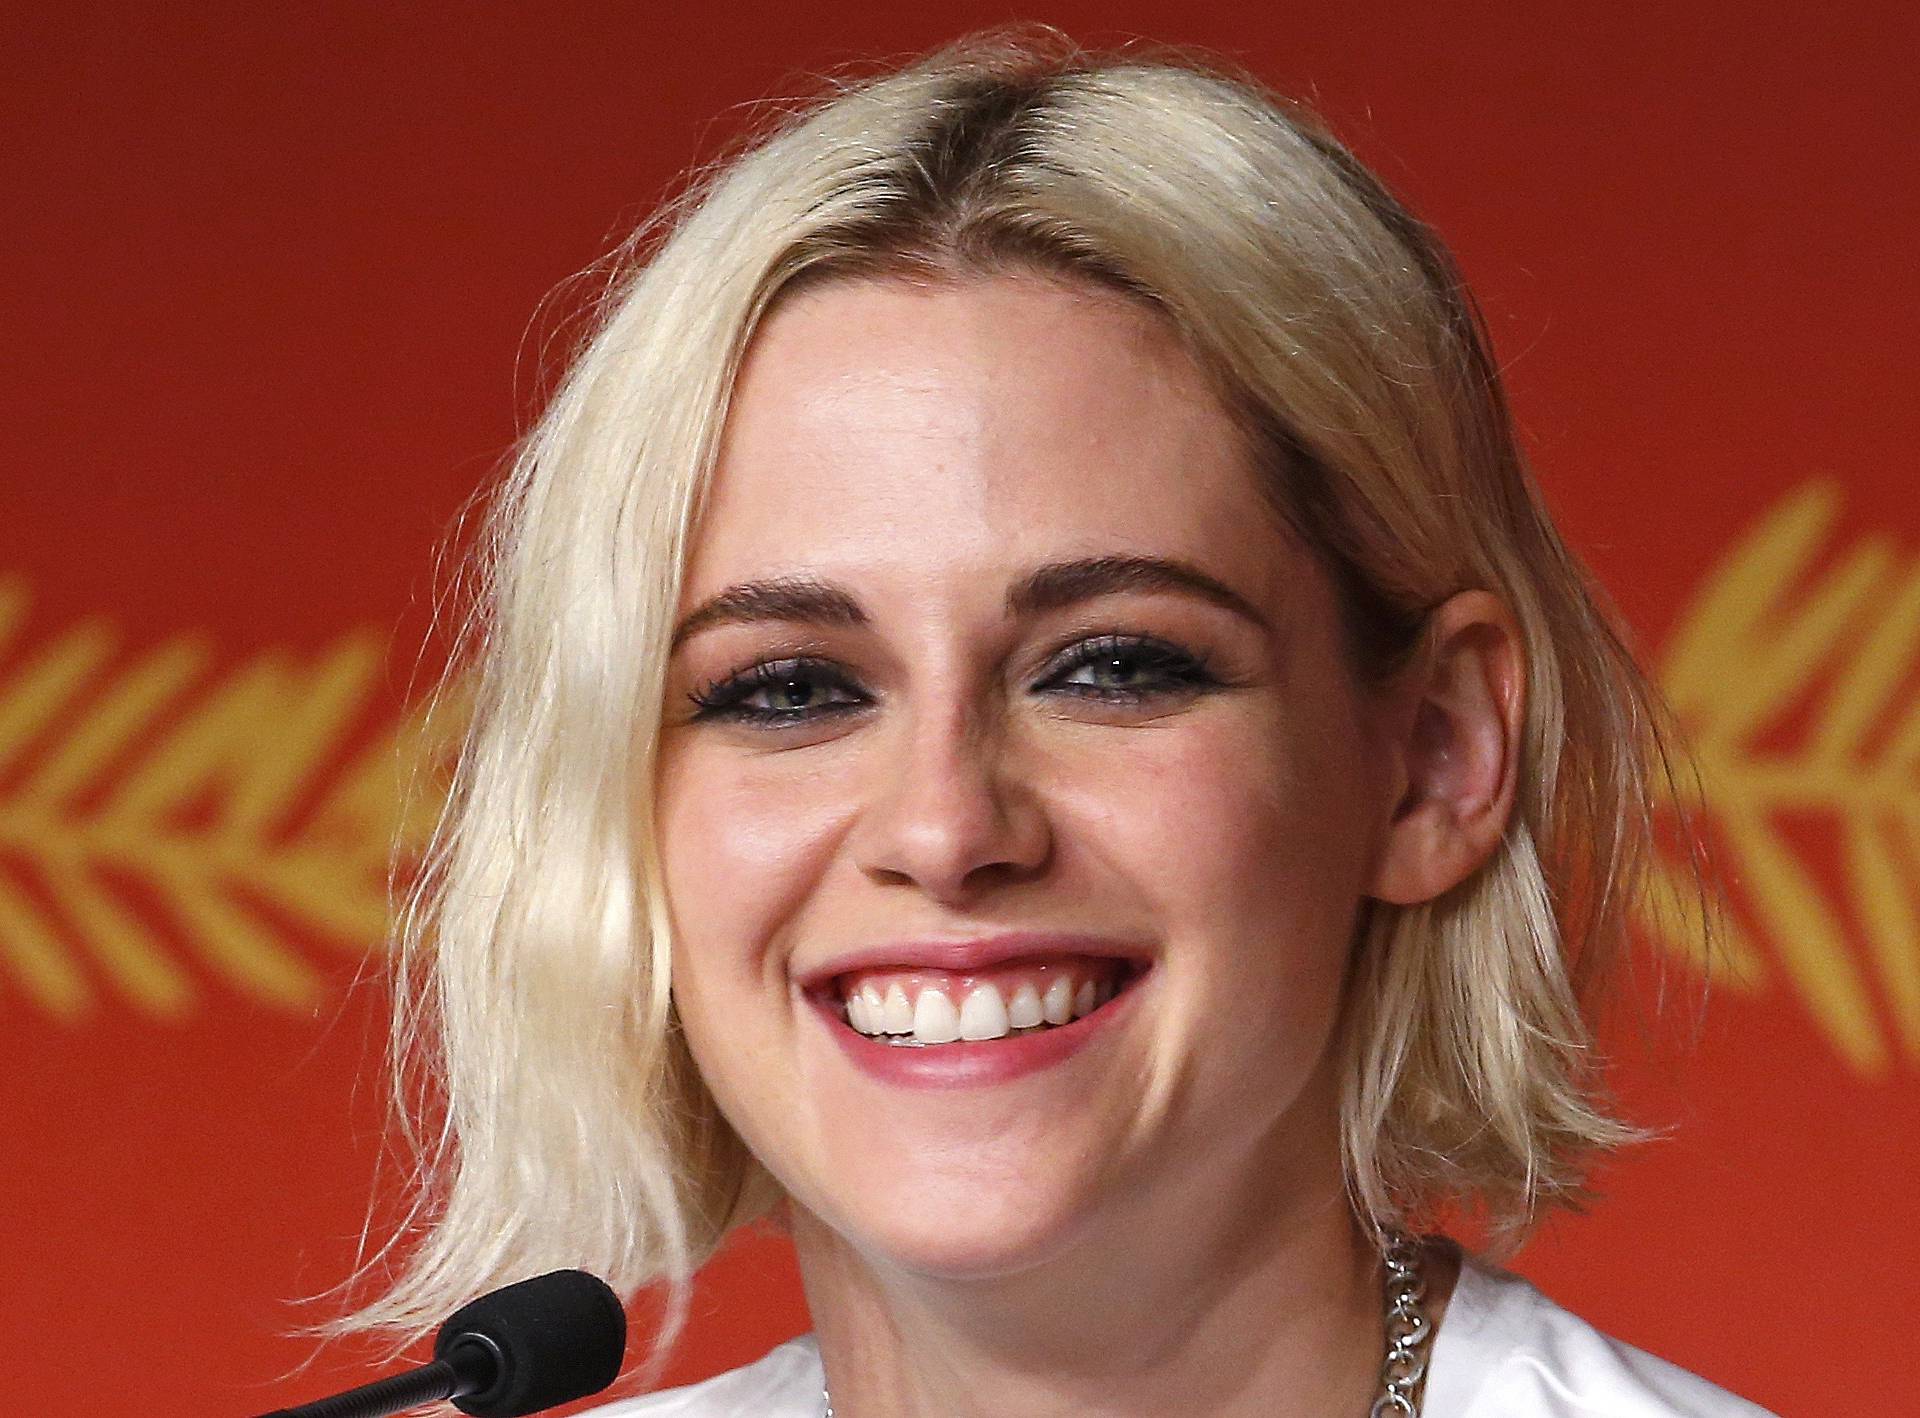 Cast member Kristen Stewart attends a news conference for the film "Cafe Society" out of competition before the opening of the 69th Cannes Film Festival in Cannes